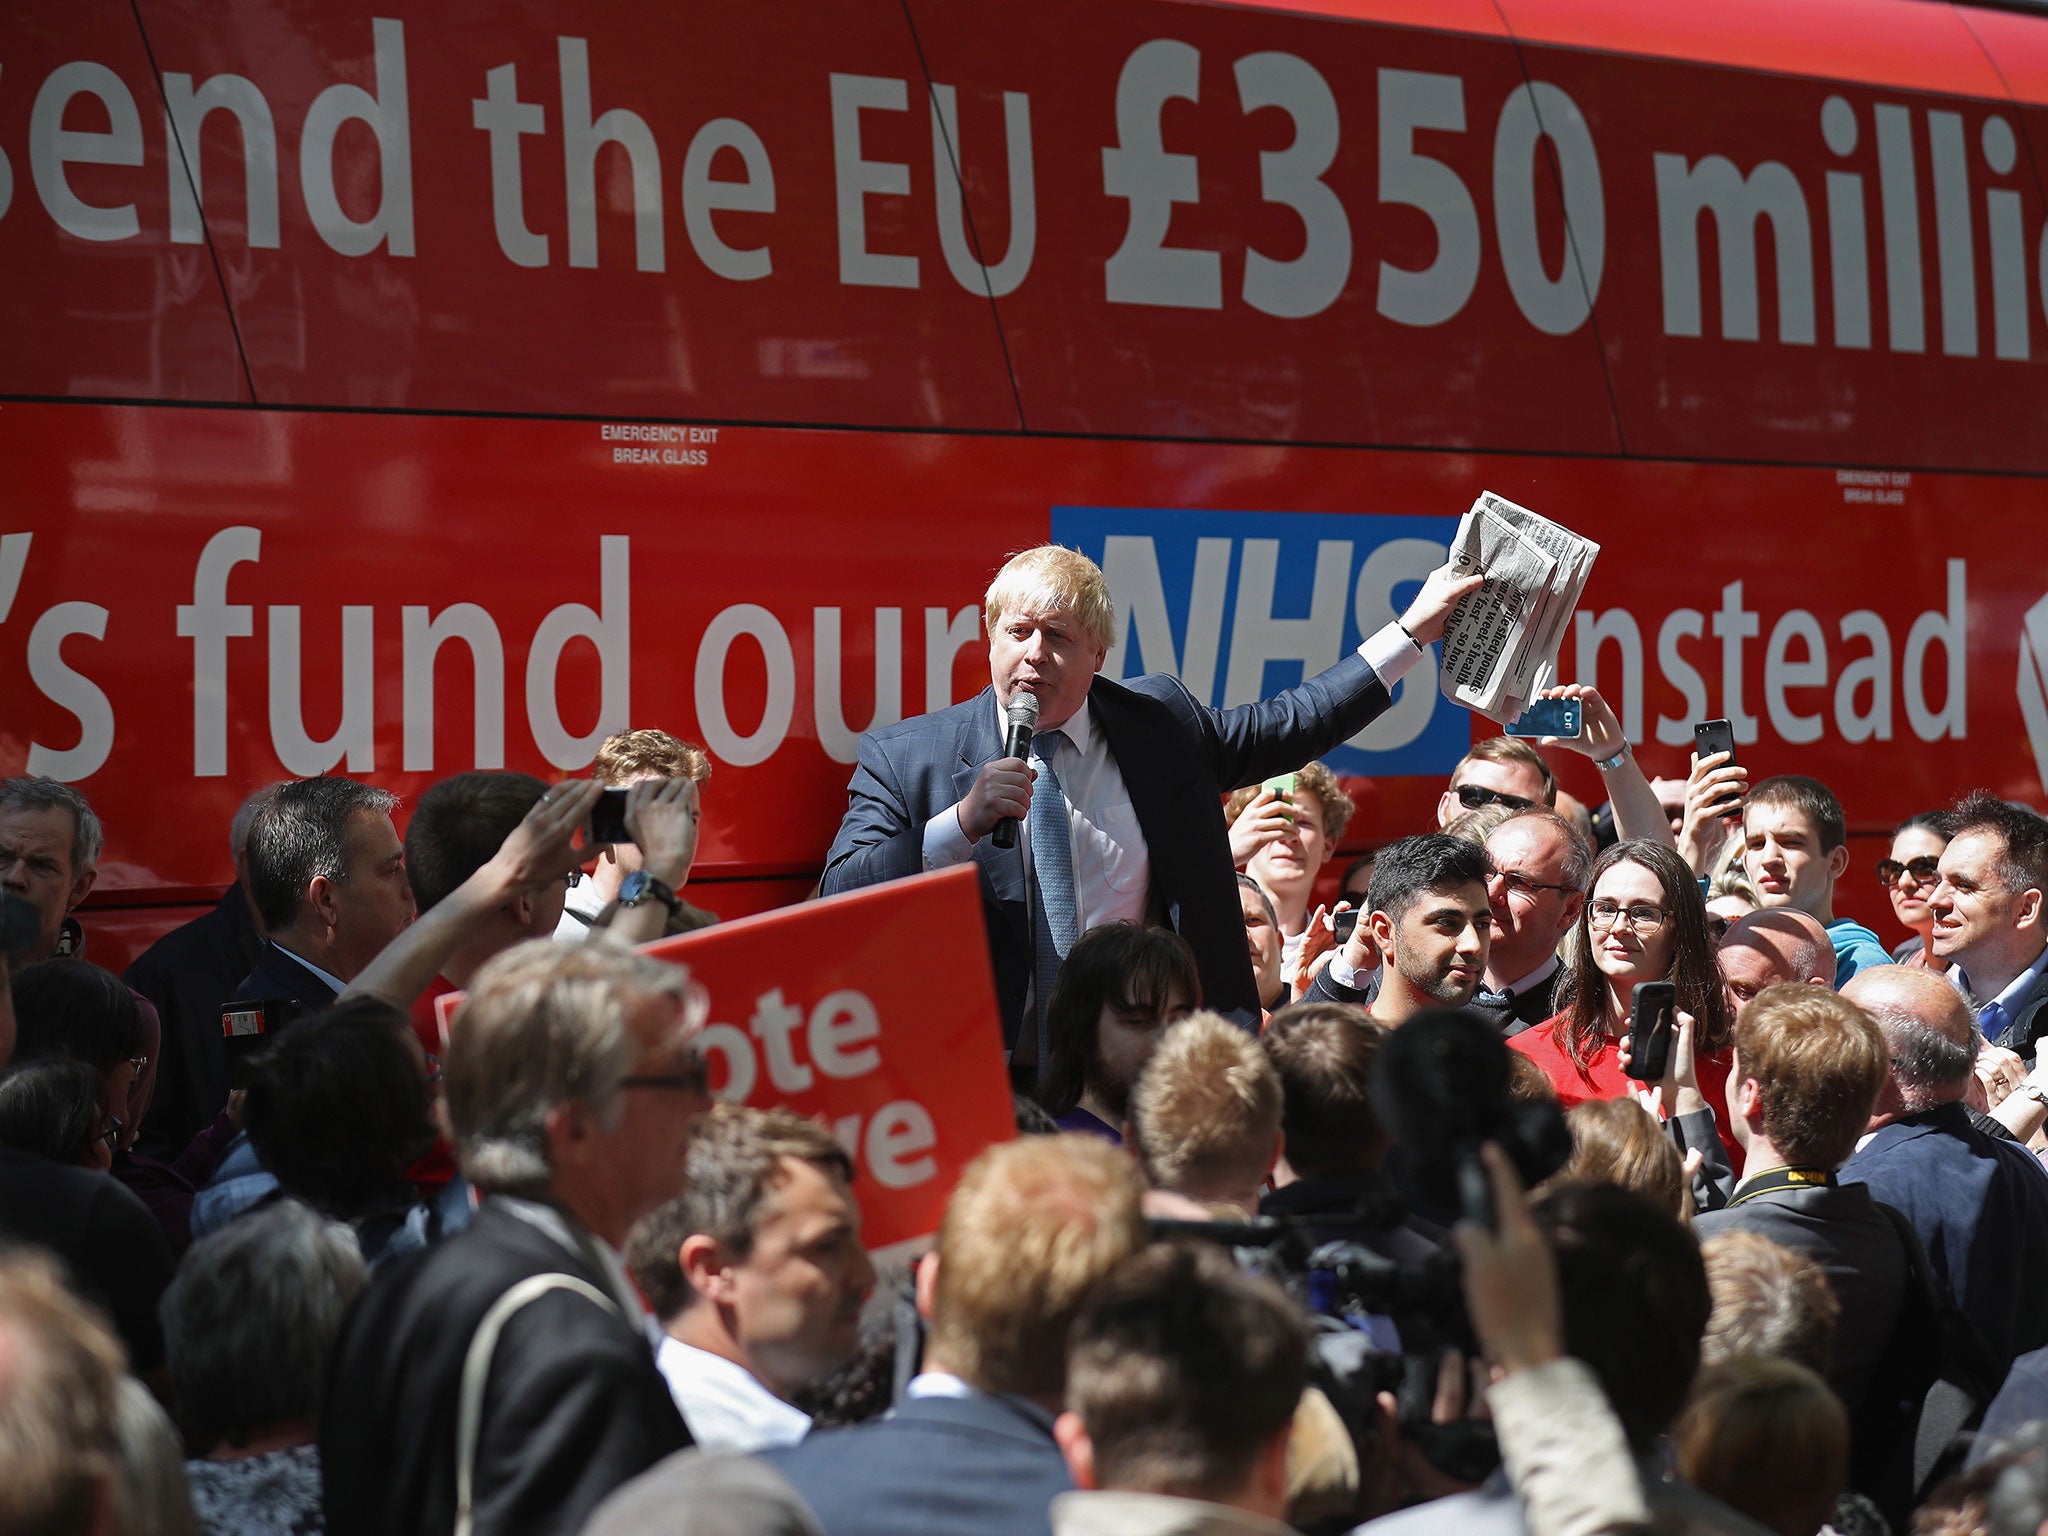 Boris Johnson and the Vote Leave campaign toured the UK in the Brexit battle bus which claimed the UK sends £350 million to the EU each week